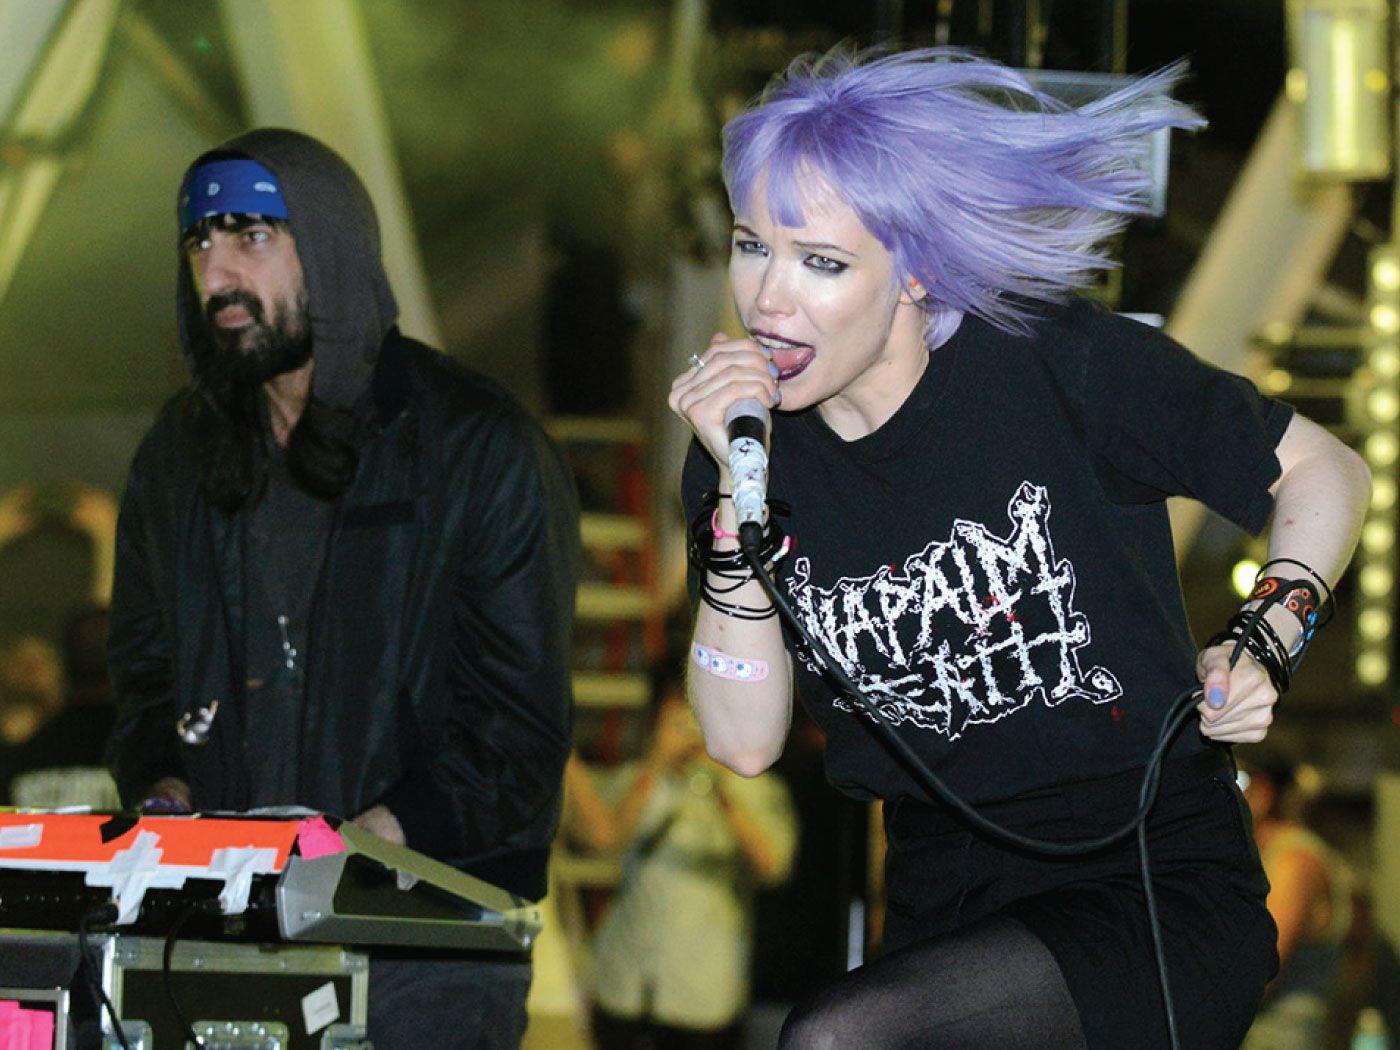 WIN TICKETS TO SEE CRYSTAL CASTLES ON 10 21 AT THE WILTERN!